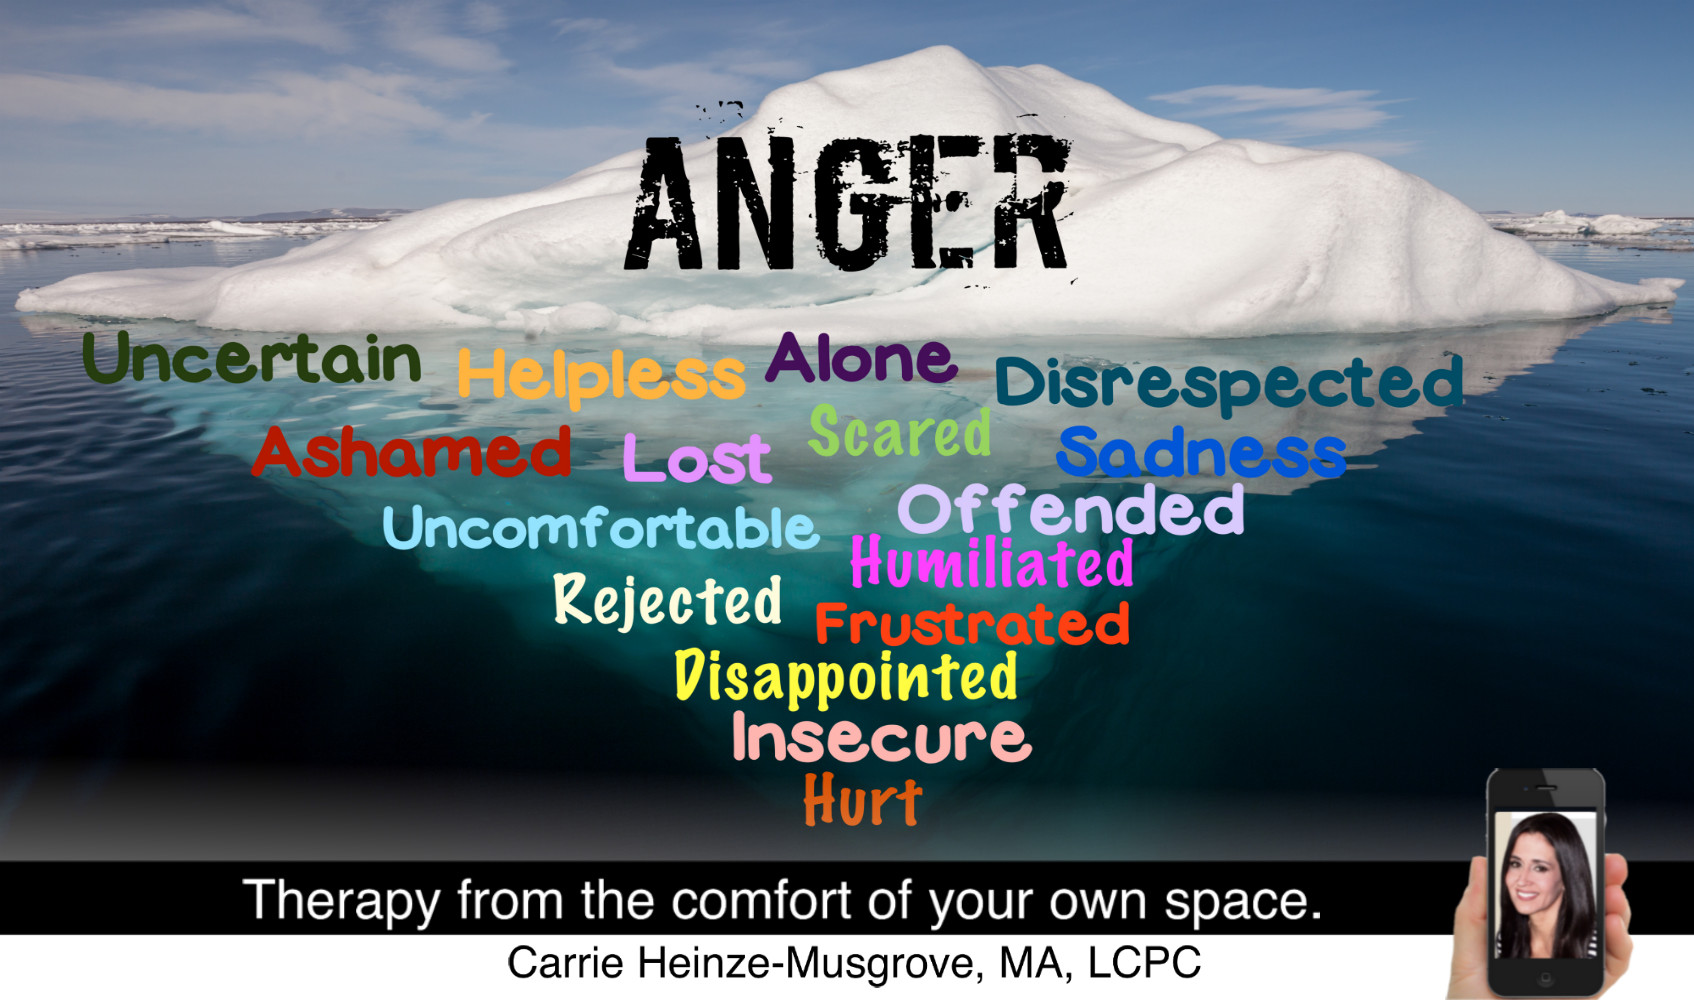 Why is it easier to feel anger than hurt?